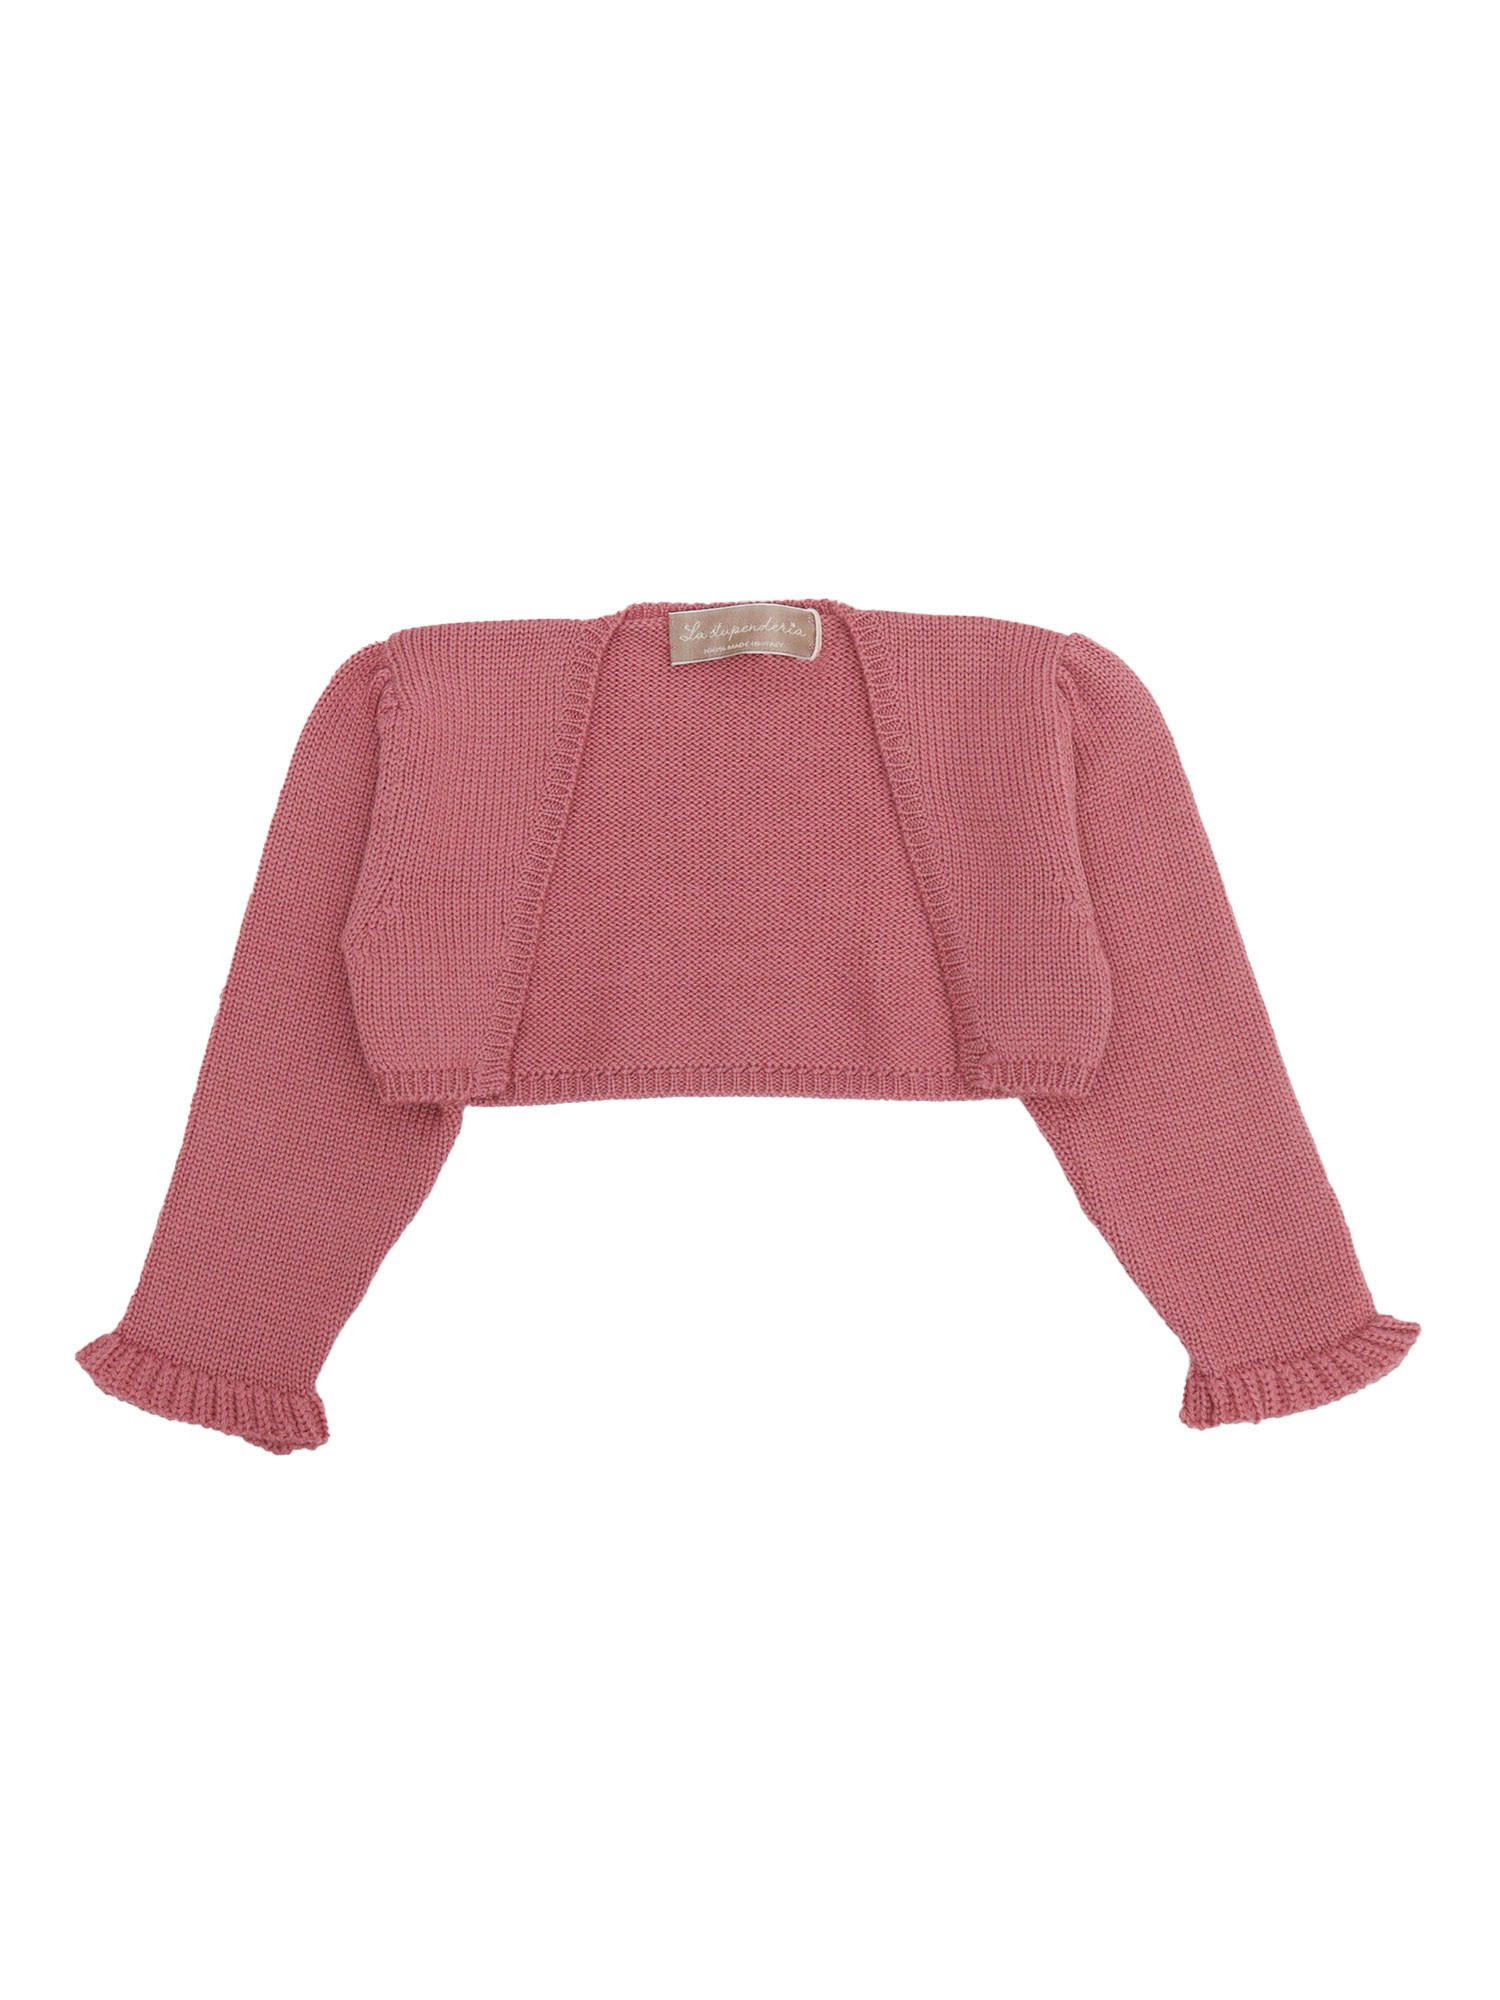 La Stupenderia Knitted Shrug In Pink